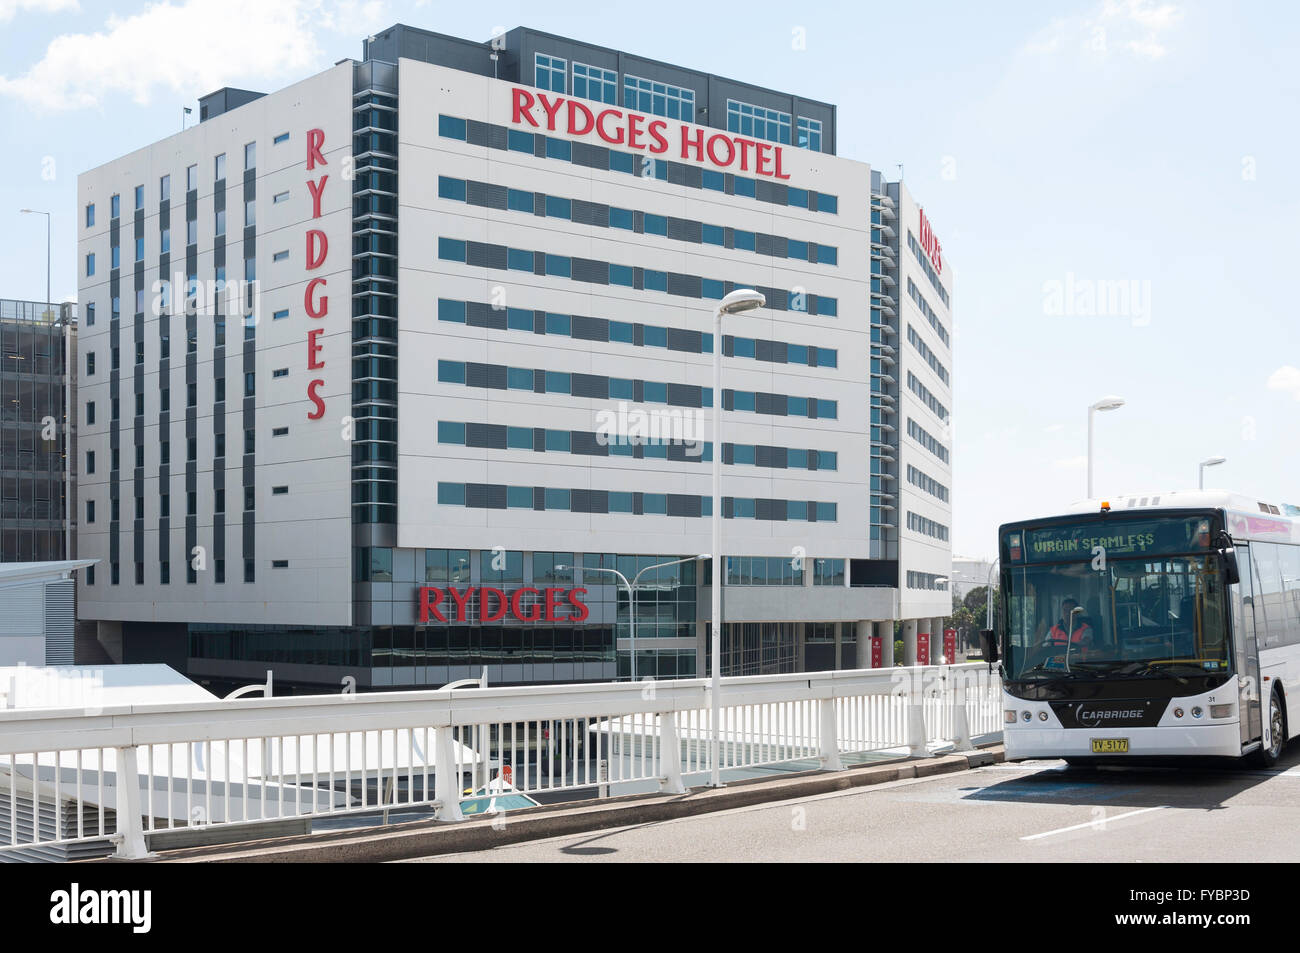 Rydges Sydney Airport Hotel at Sydney Kingsford Smith Airport, Mascot, Sydney, New South Wales, Australia Stock Photo